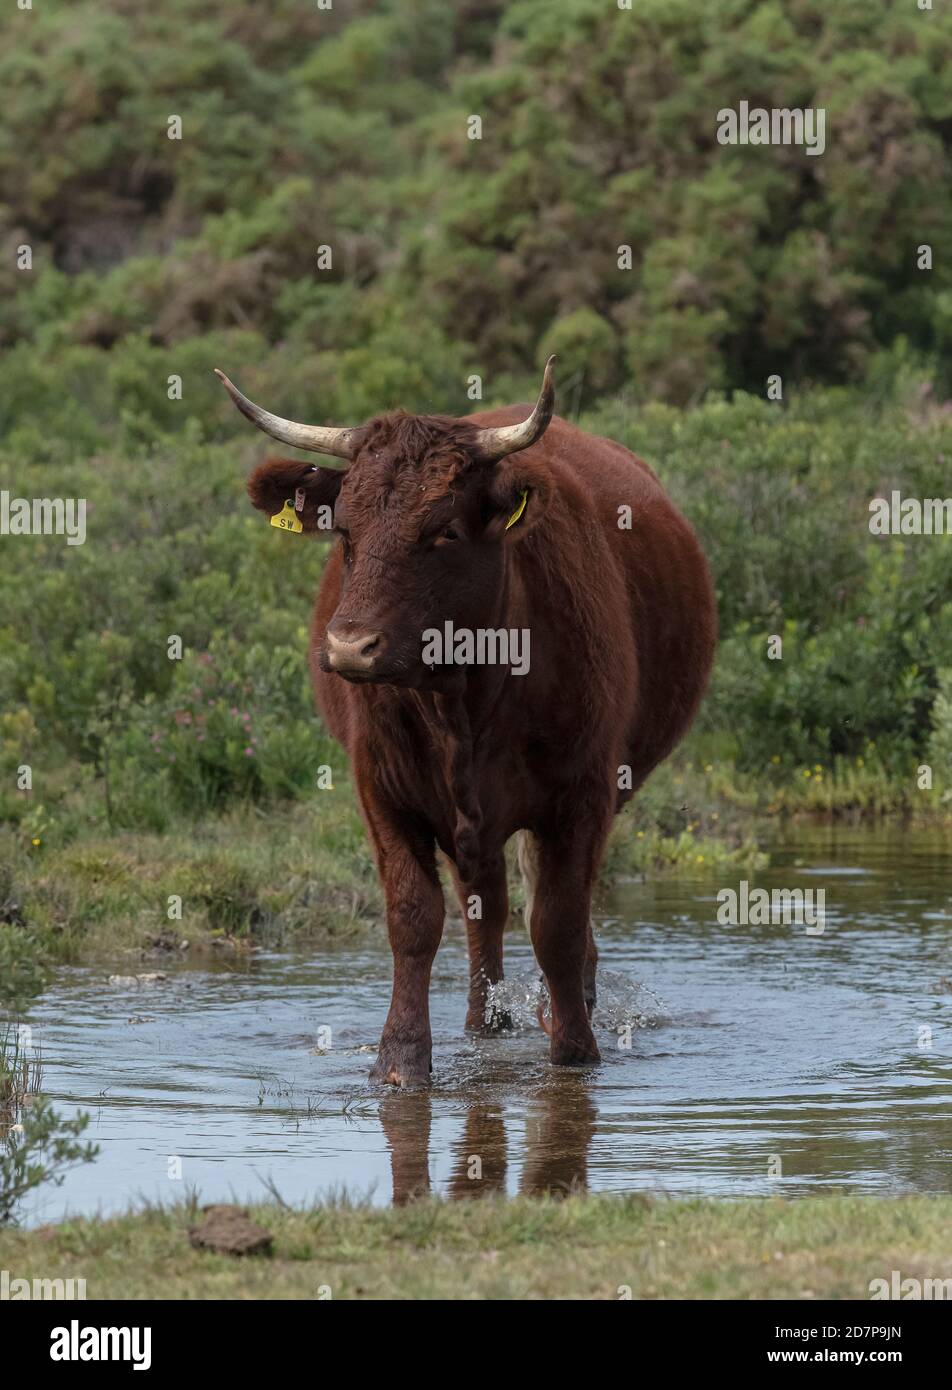 Red cattle grazing in the New Forest, horned Sussex breed, near Hatchet Pond, Hampshire. Stock Photo